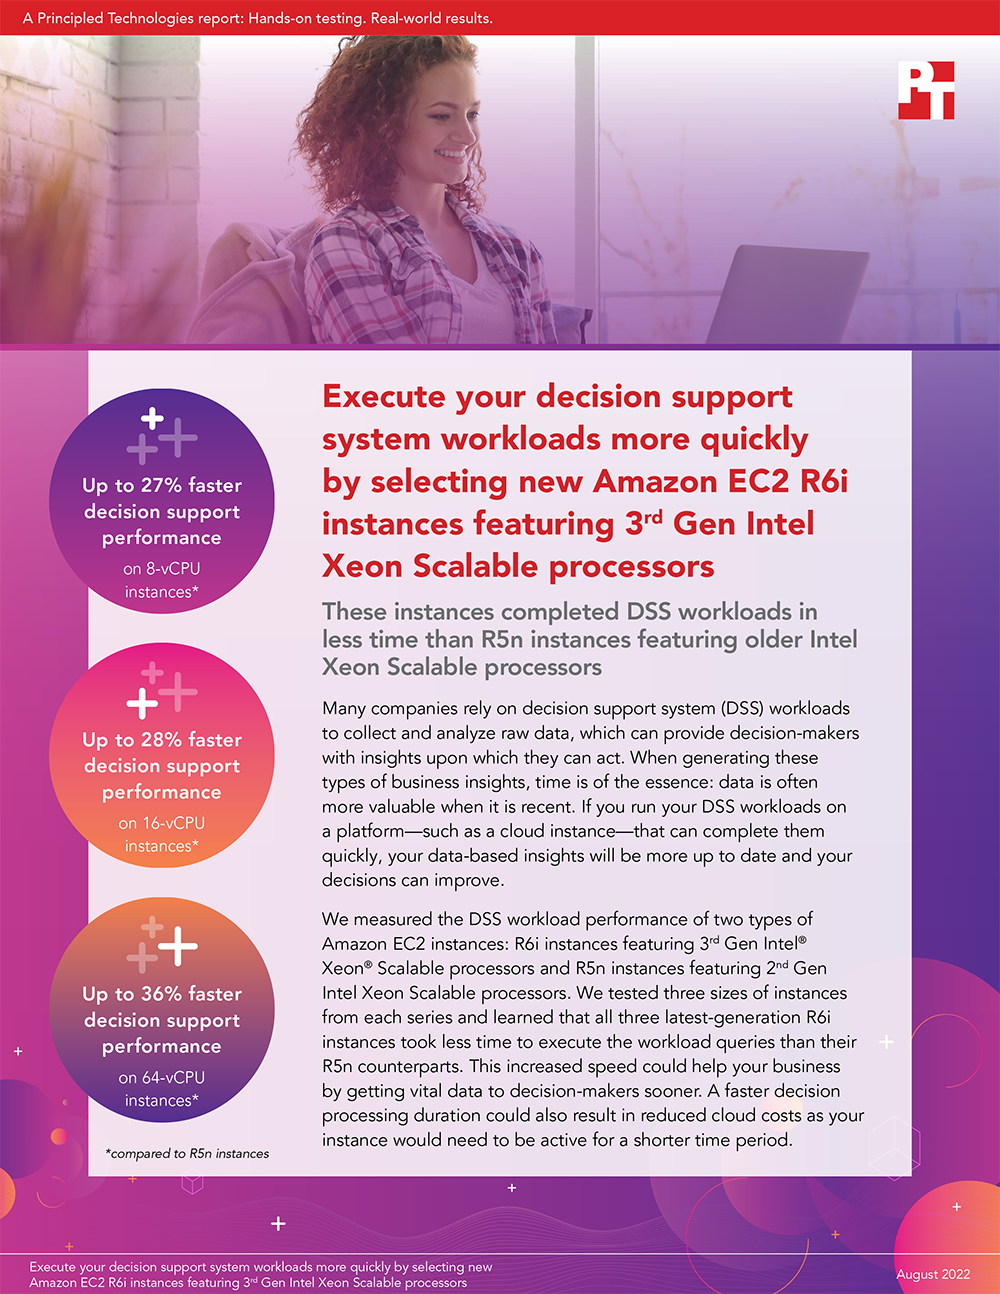  Execute your decision support system workloads more quickly by selecting new Amazon EC2 R6i instances featuring 3rd Gen Intel Xeon Scalable processors